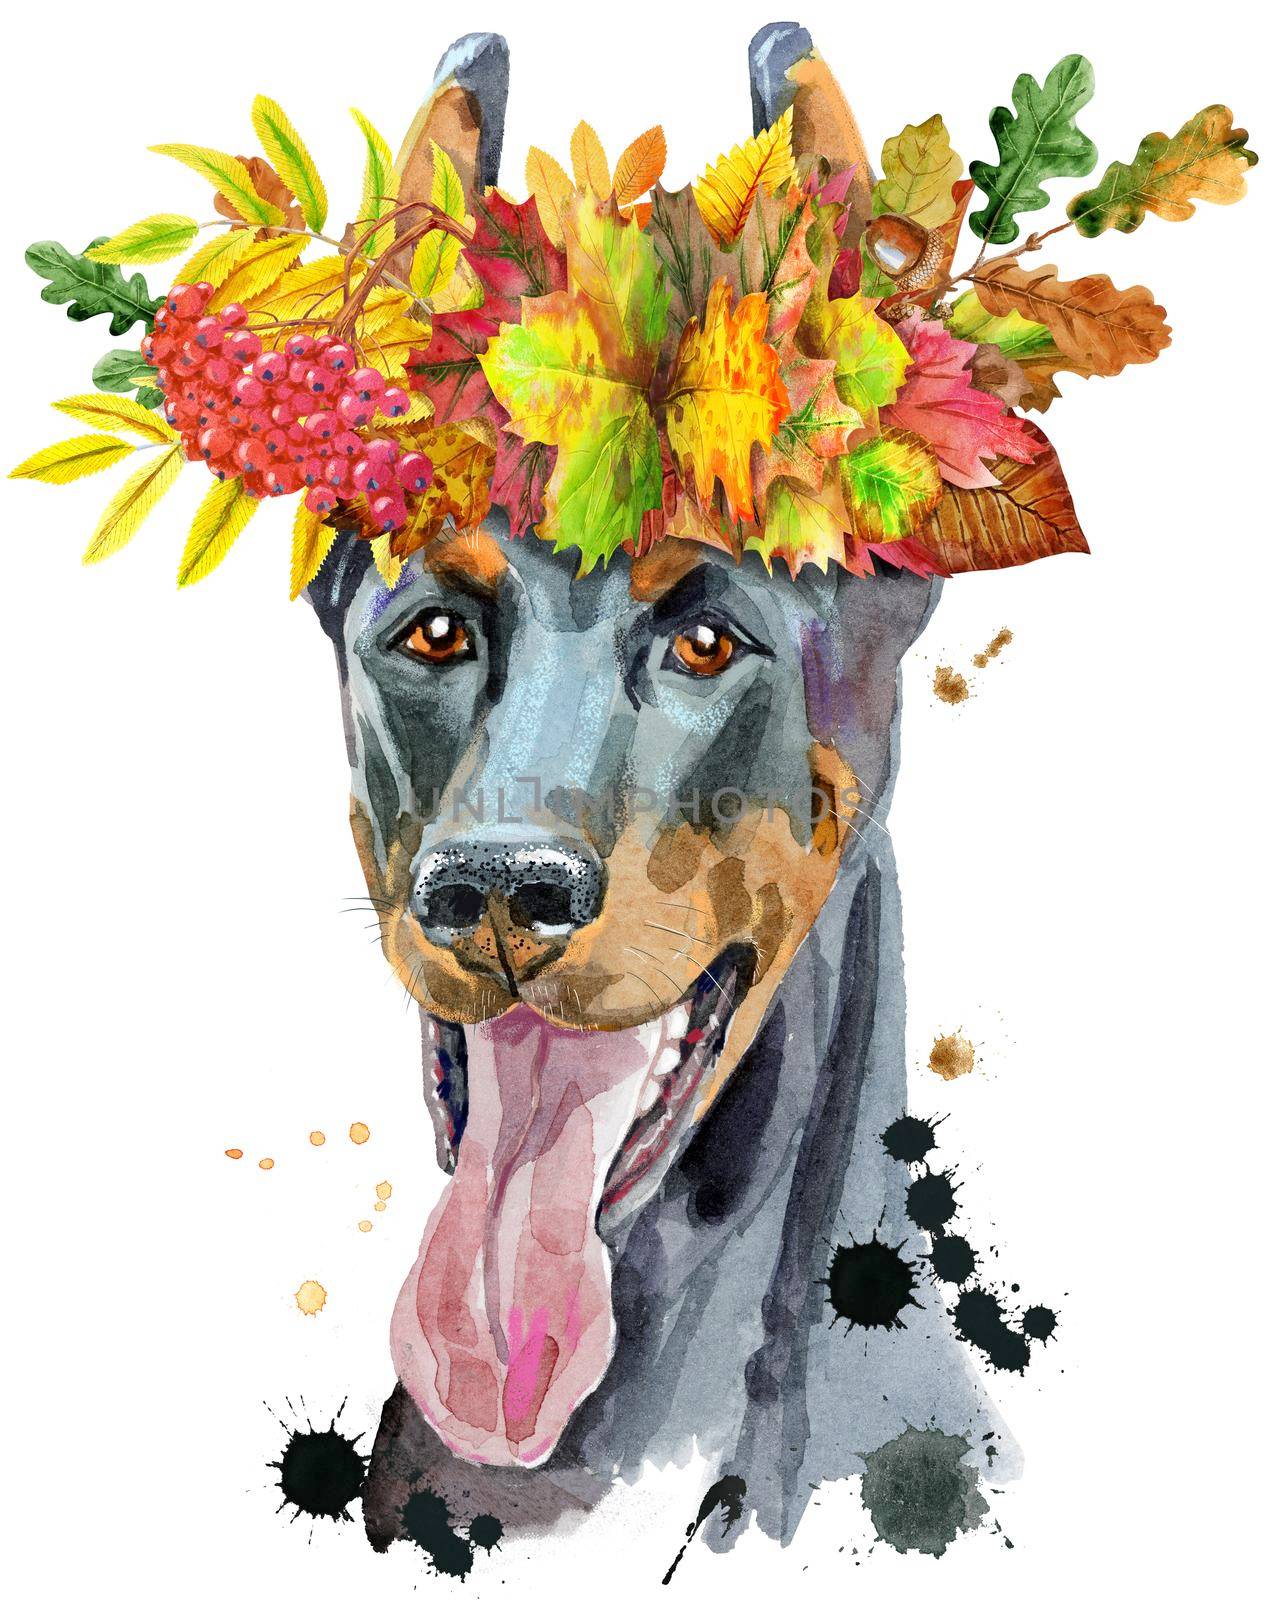 Cute Dog in a wreath of autumn leaves. Dog T-shirt graphics. watercolor doberman illustration